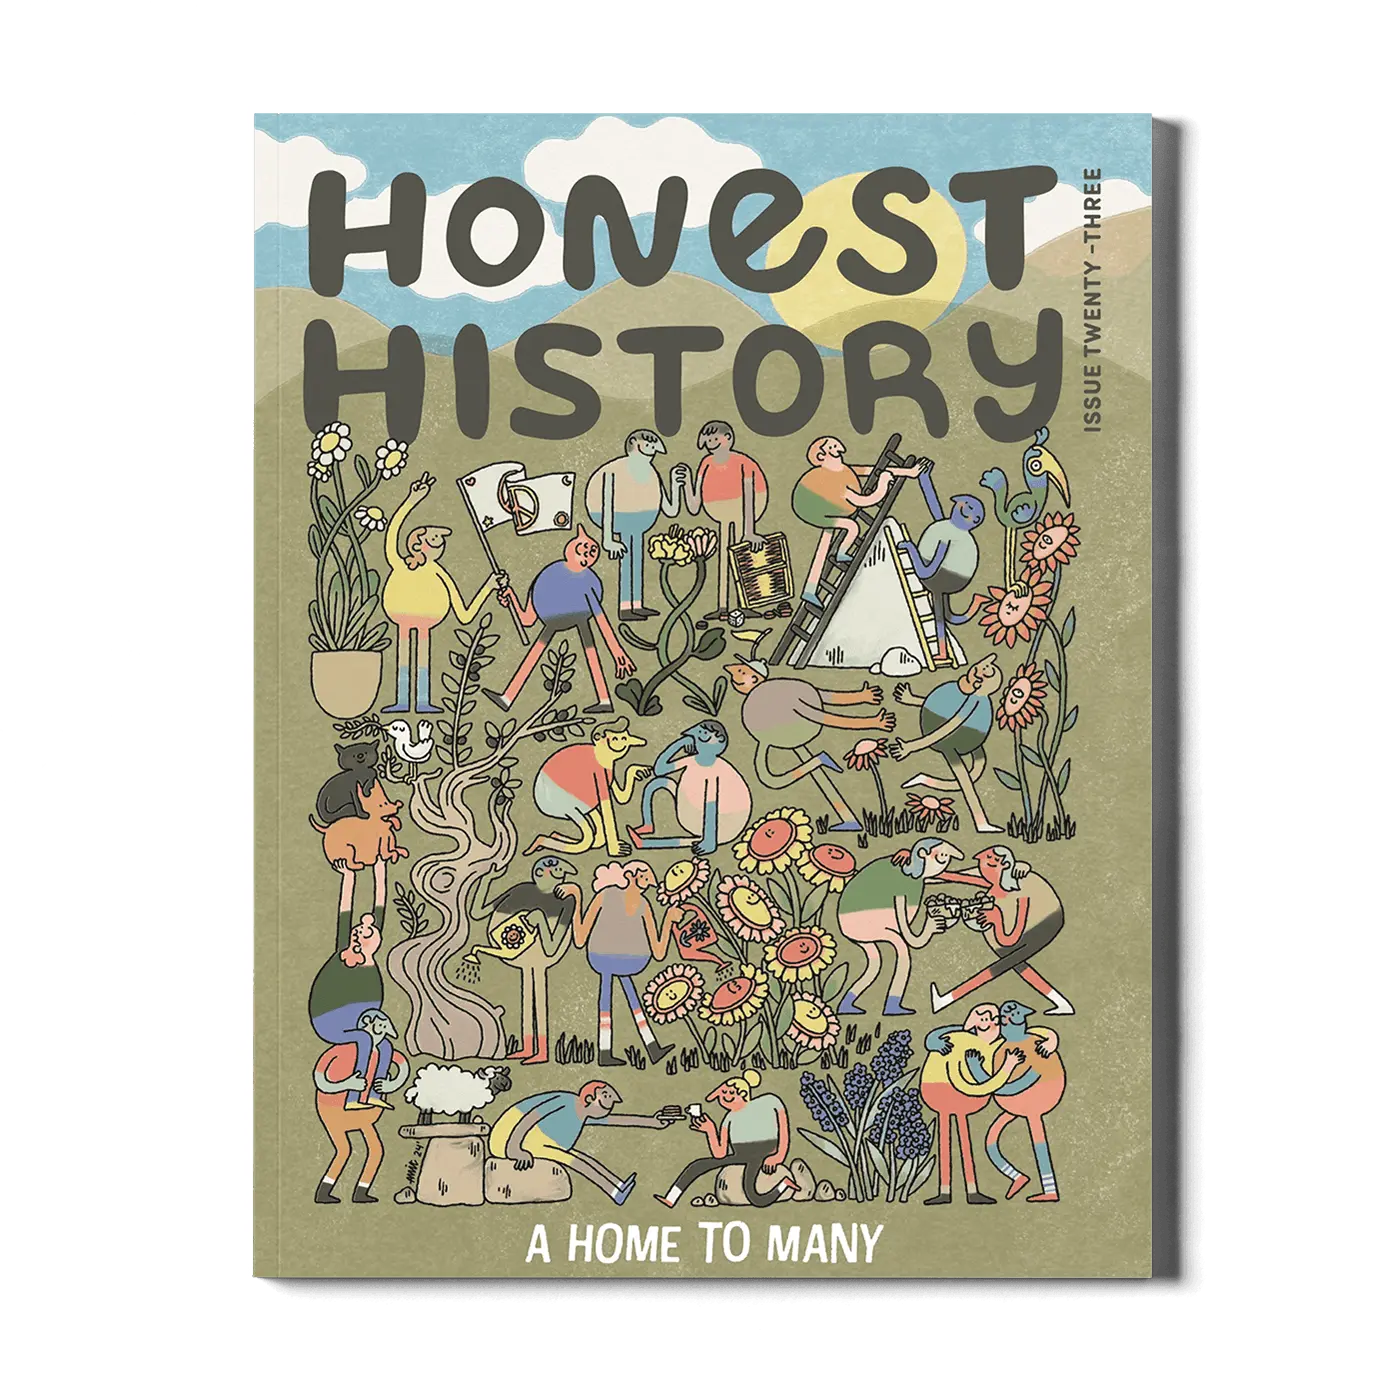 Honest History magazine Issue 23 cover about israel and palestine